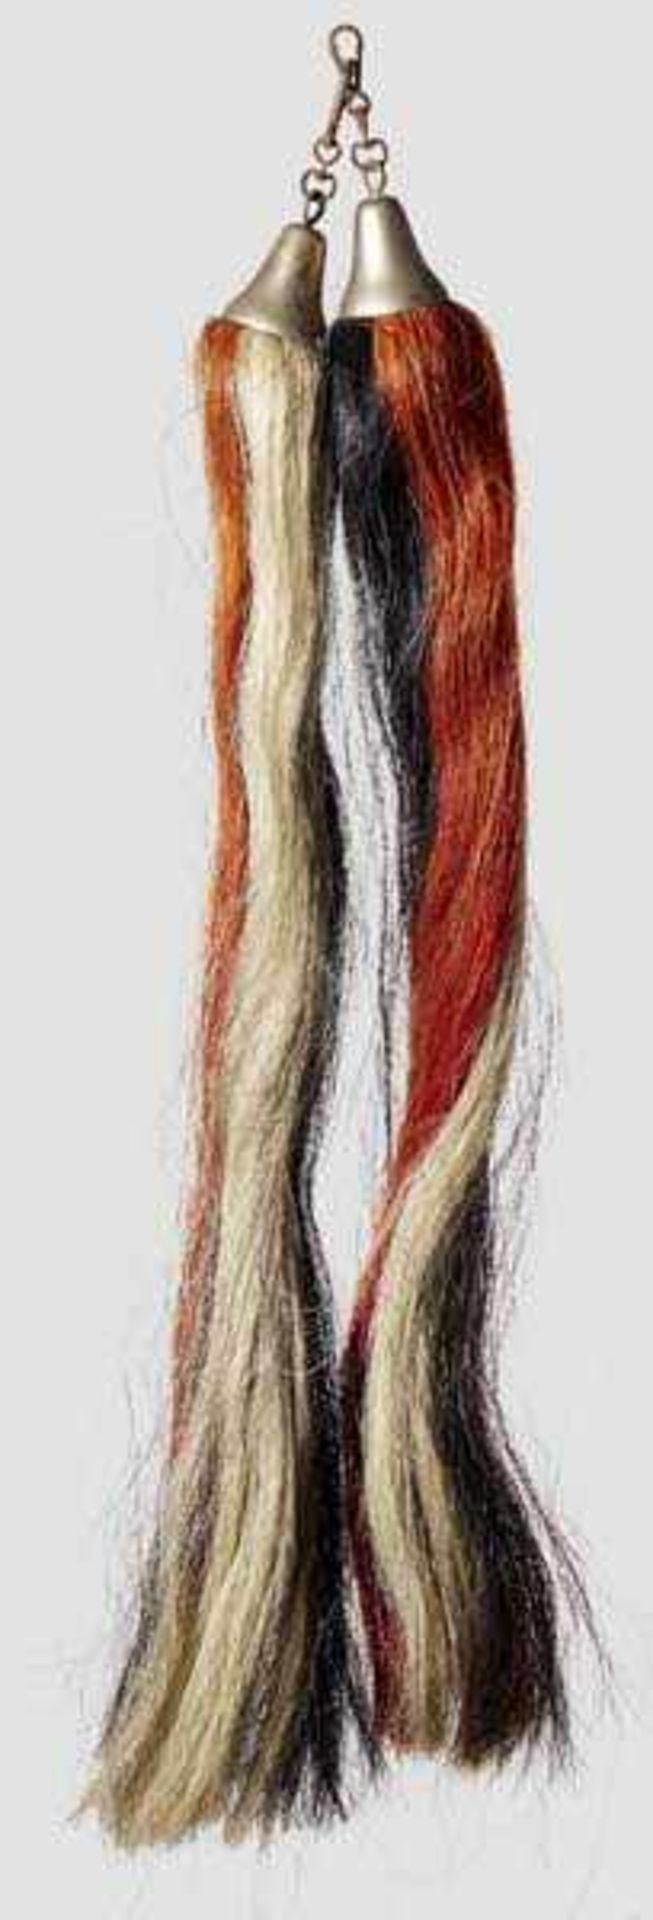 A pair of Schellenbaum tails Ca. 75 cm lengths of horse hair dyed in the national colours of